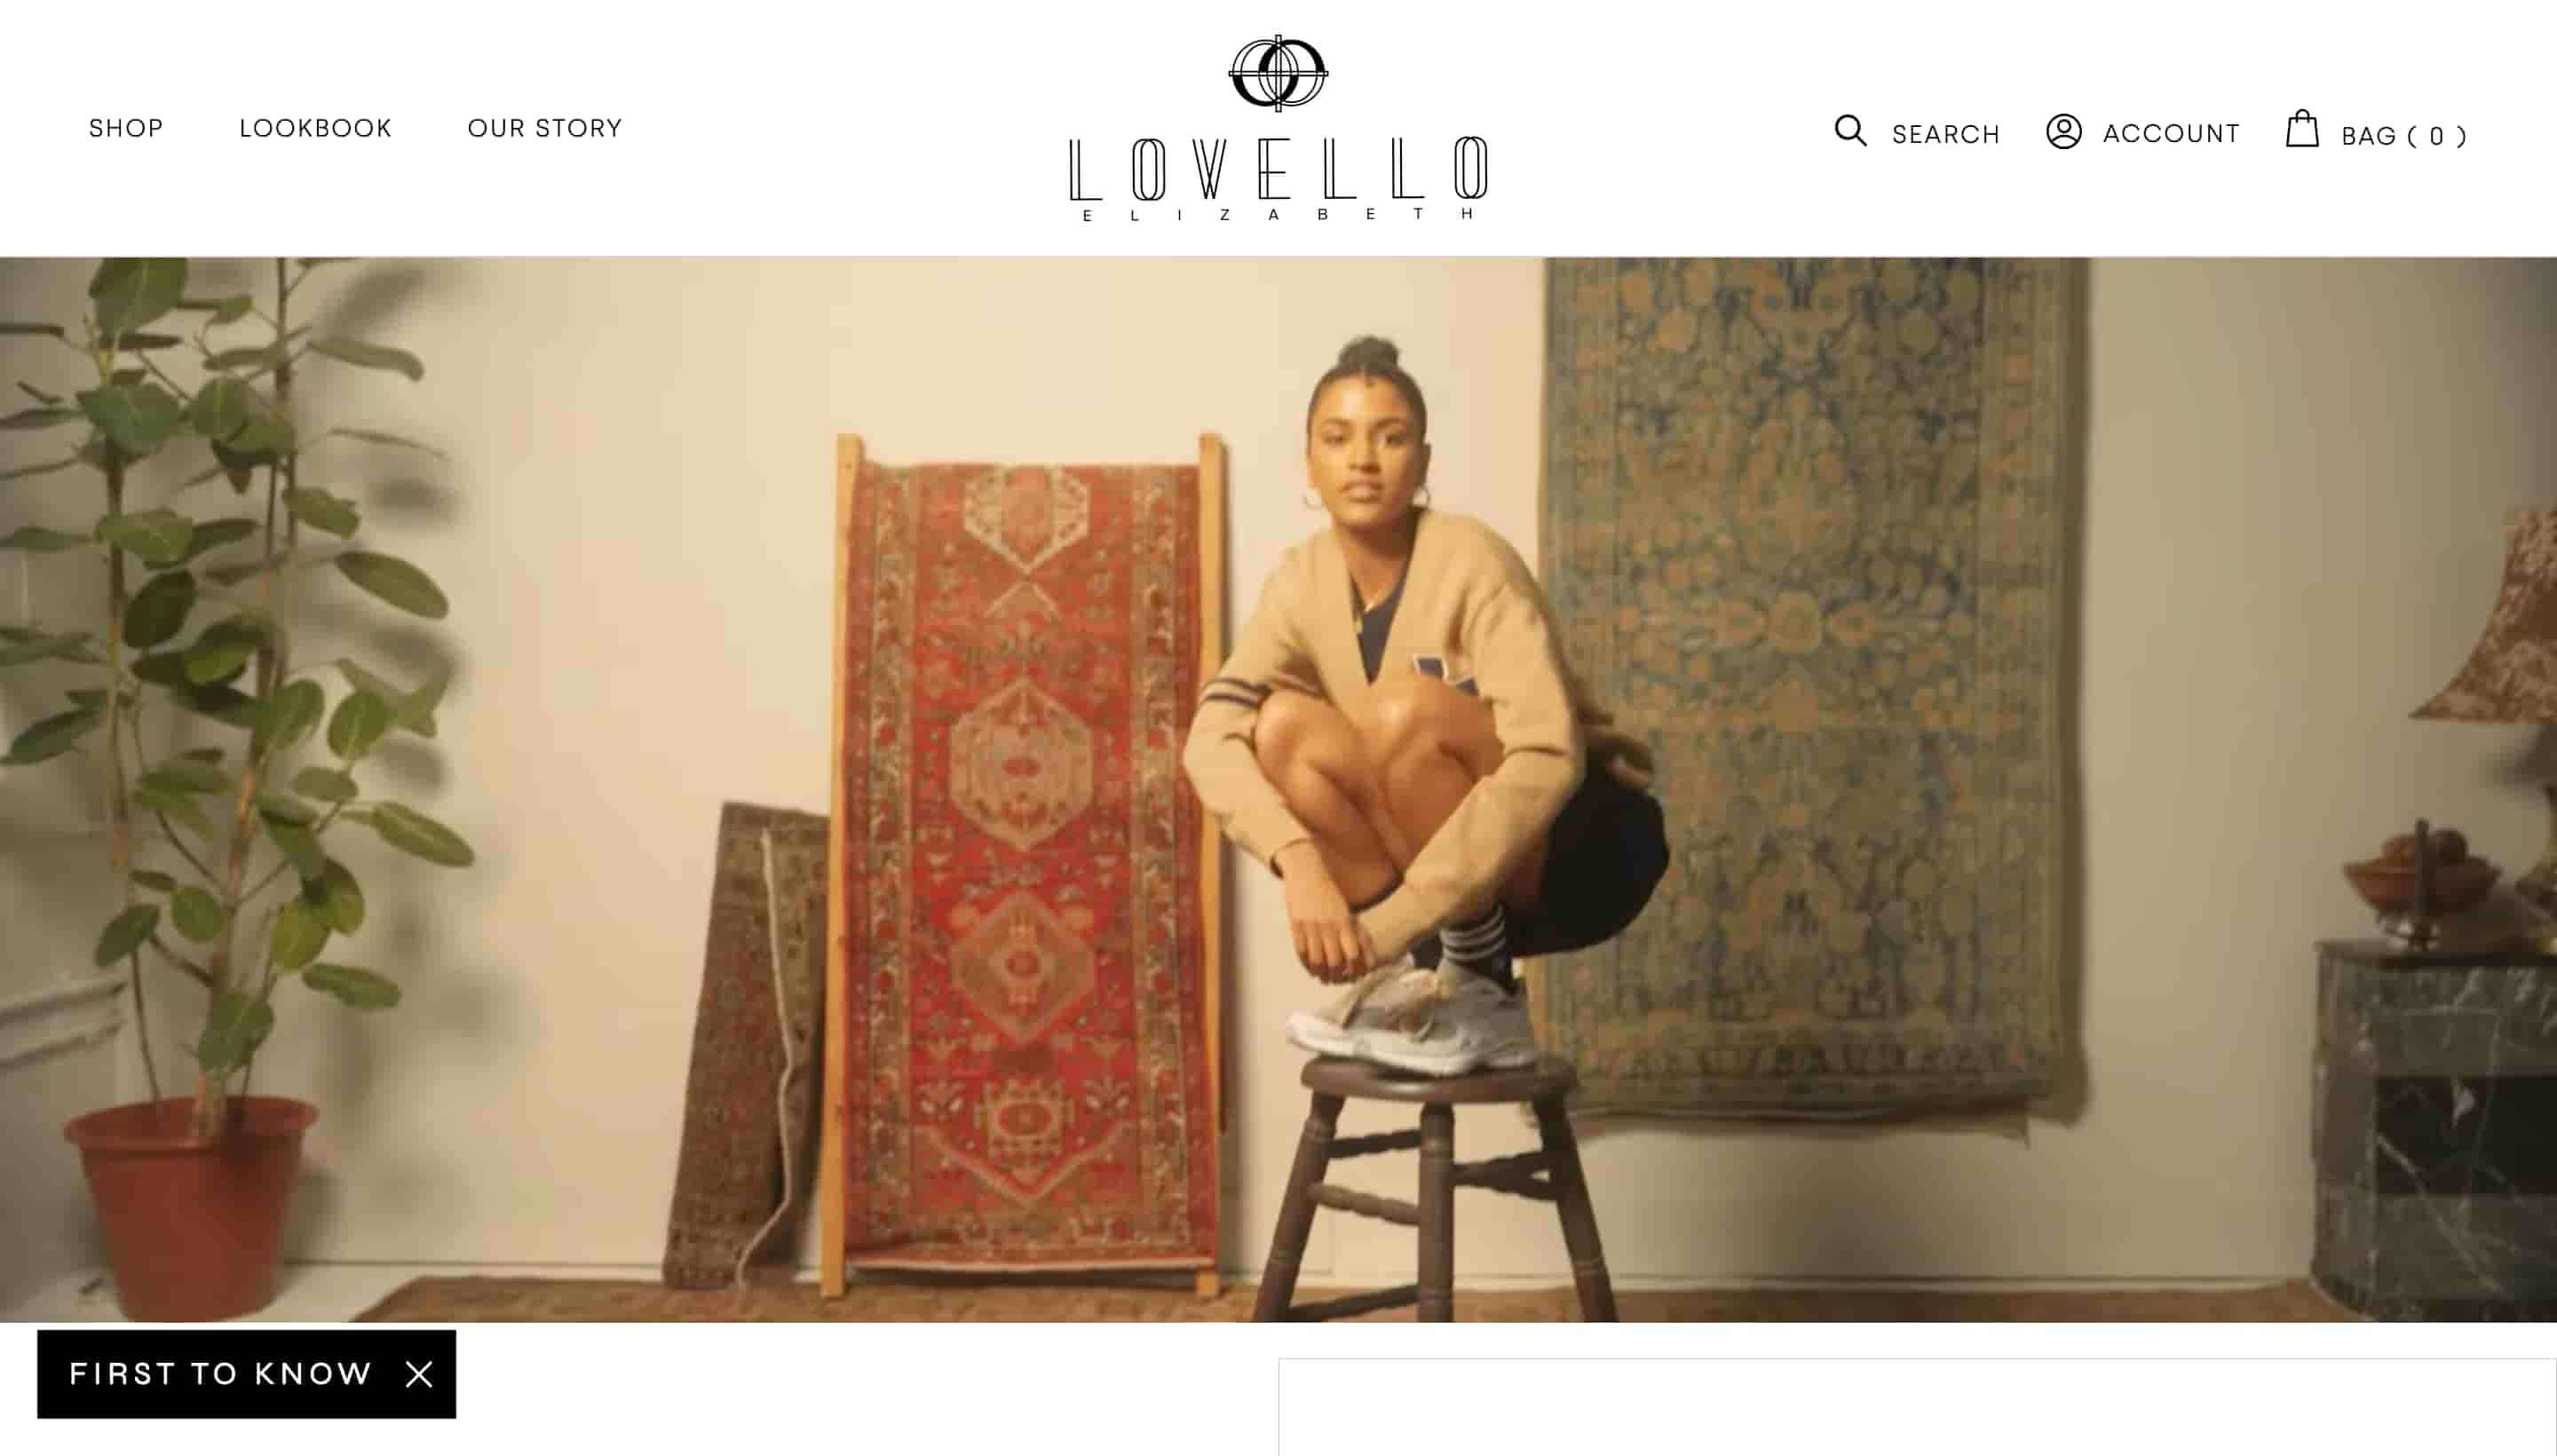 fashion website design lovello elizabeth shows person squatting on a stool with rugs in the background 